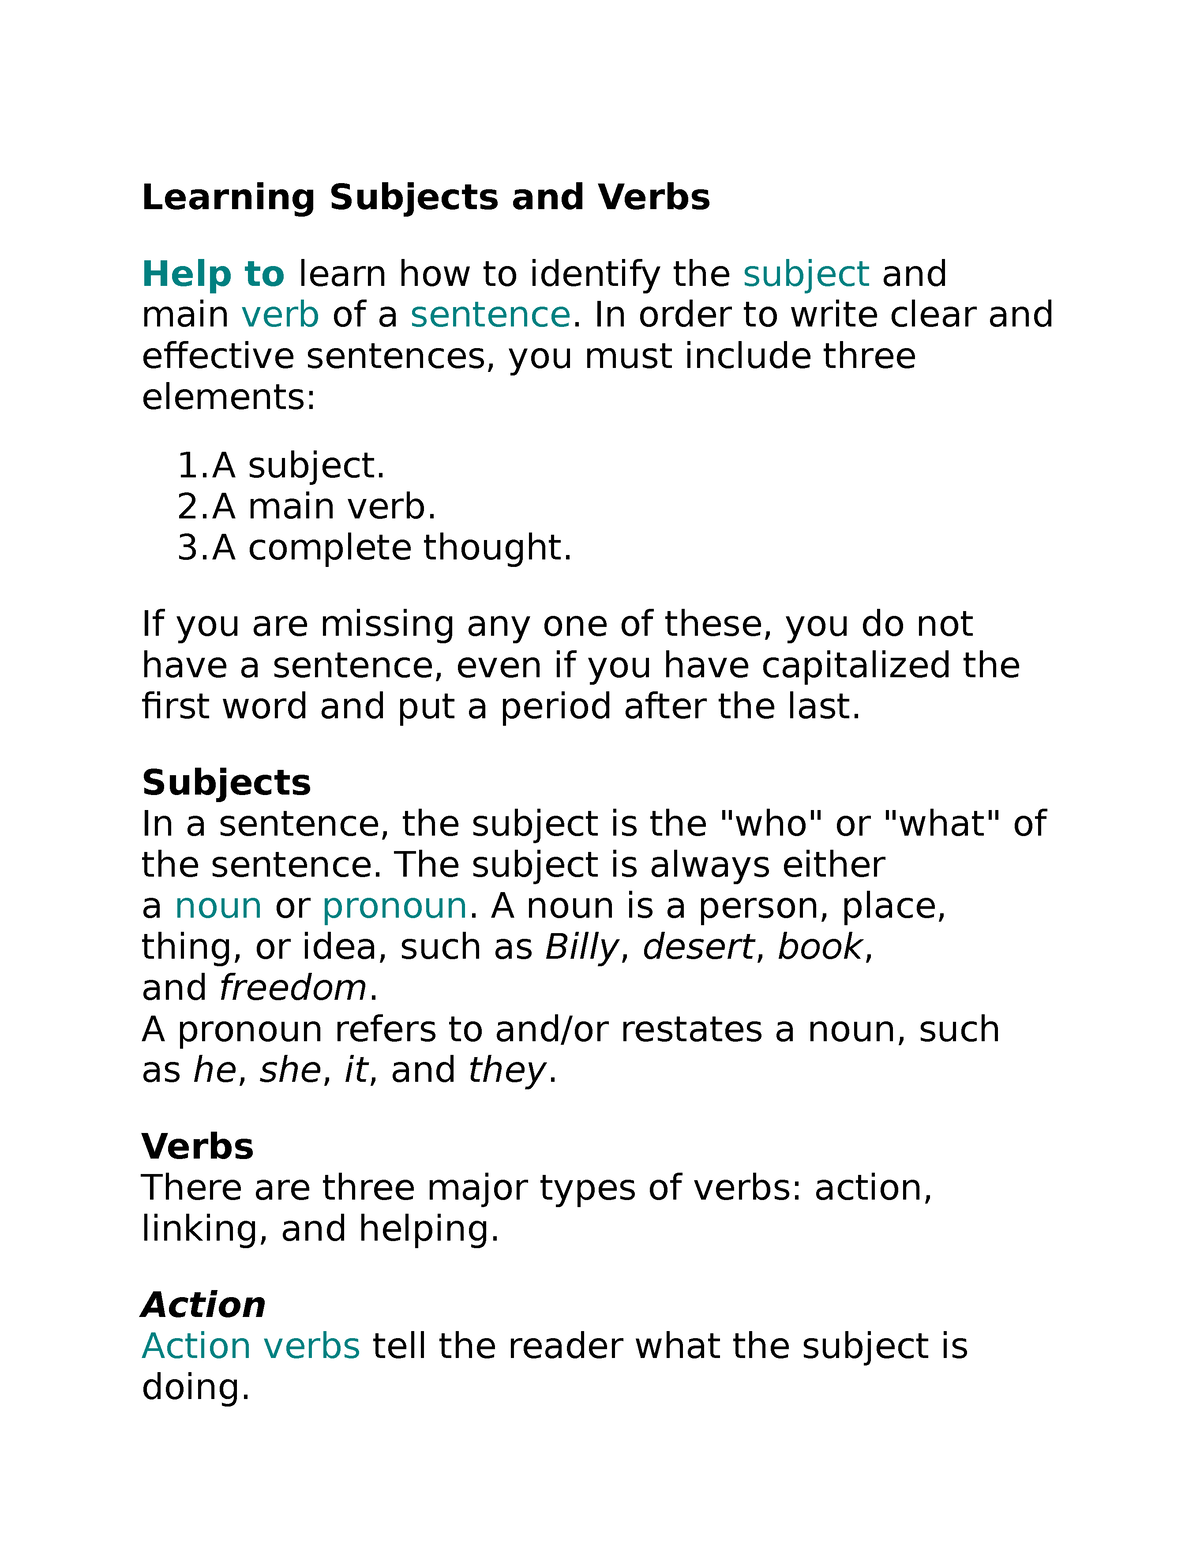 subjects-and-verbs-learning-subjects-and-verbs-help-to-learn-how-to